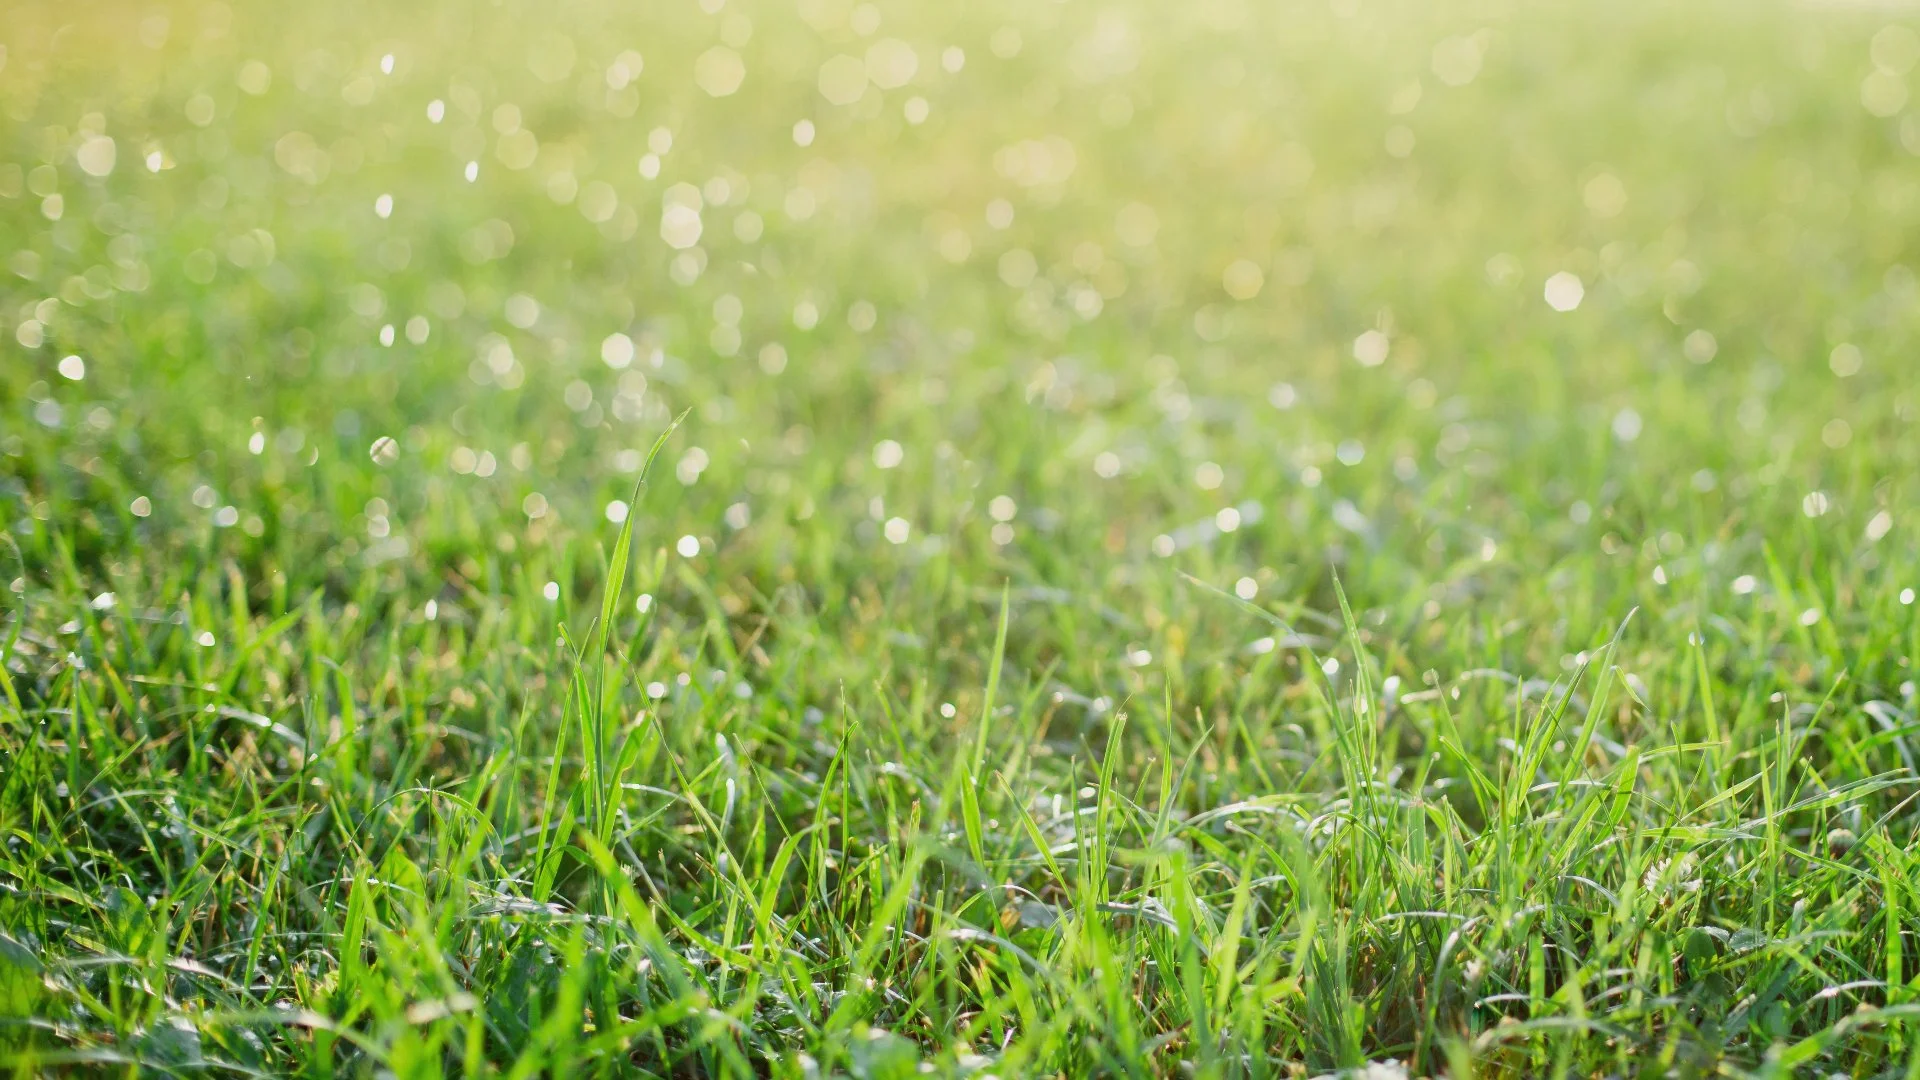 Mowing After It Rains - Is It Okay or Not?